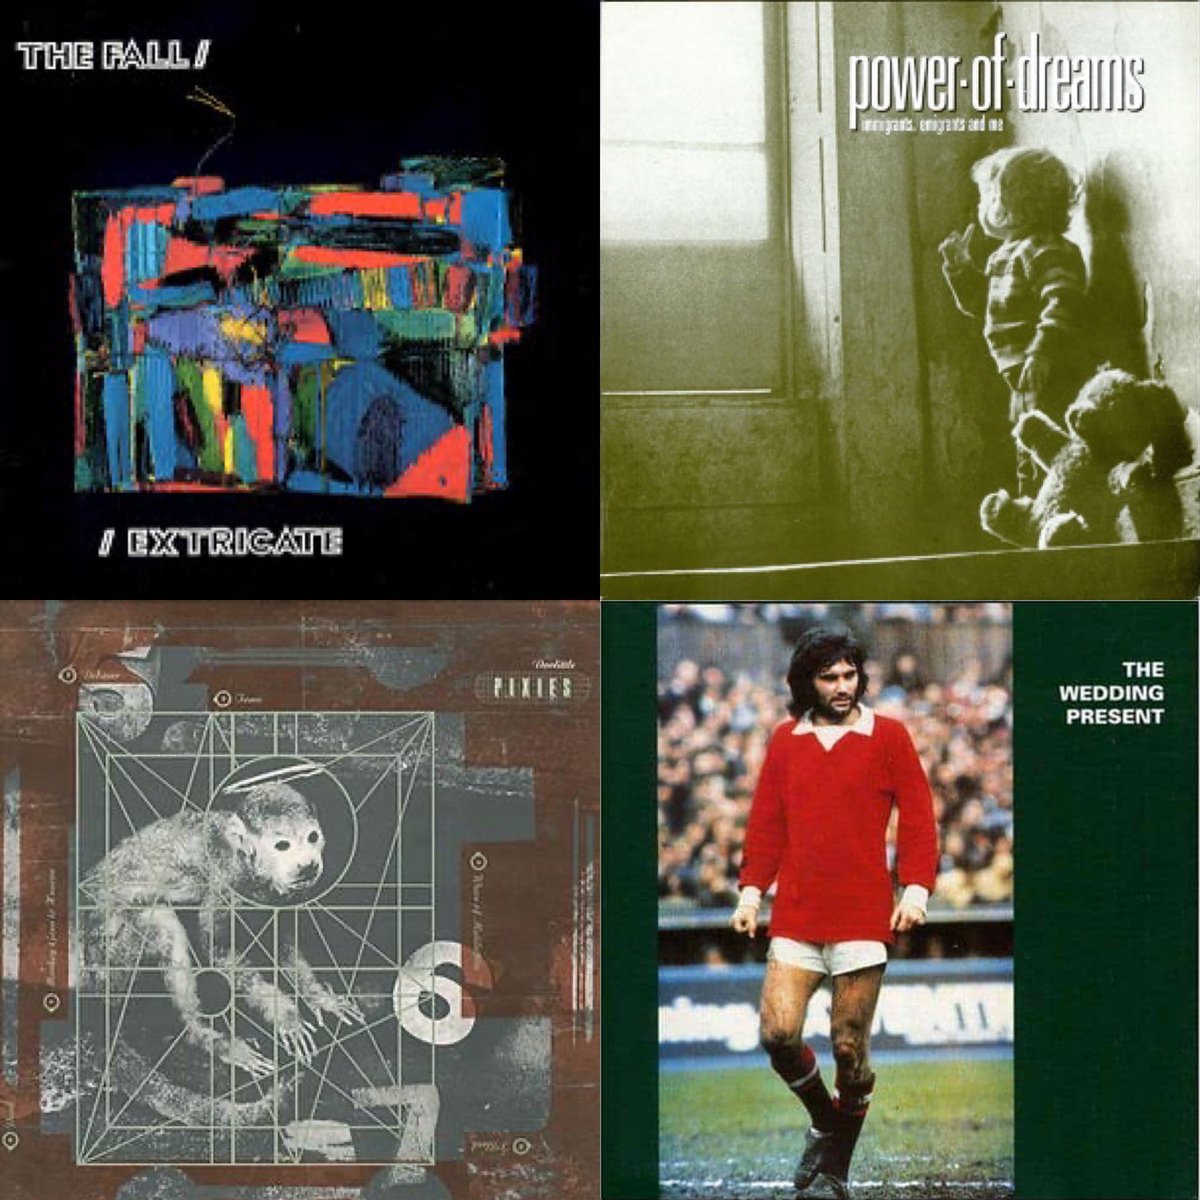 Amongst the tracks picked by @BPete1970 for my Indie Brunch this weekend on @louderthanwar are ones from these albums... but which tracks??? 

@OhBrotherShow @simonWolstencr1 @weddingpresent @PIXIES @powerofdreams30 @MartinBramah